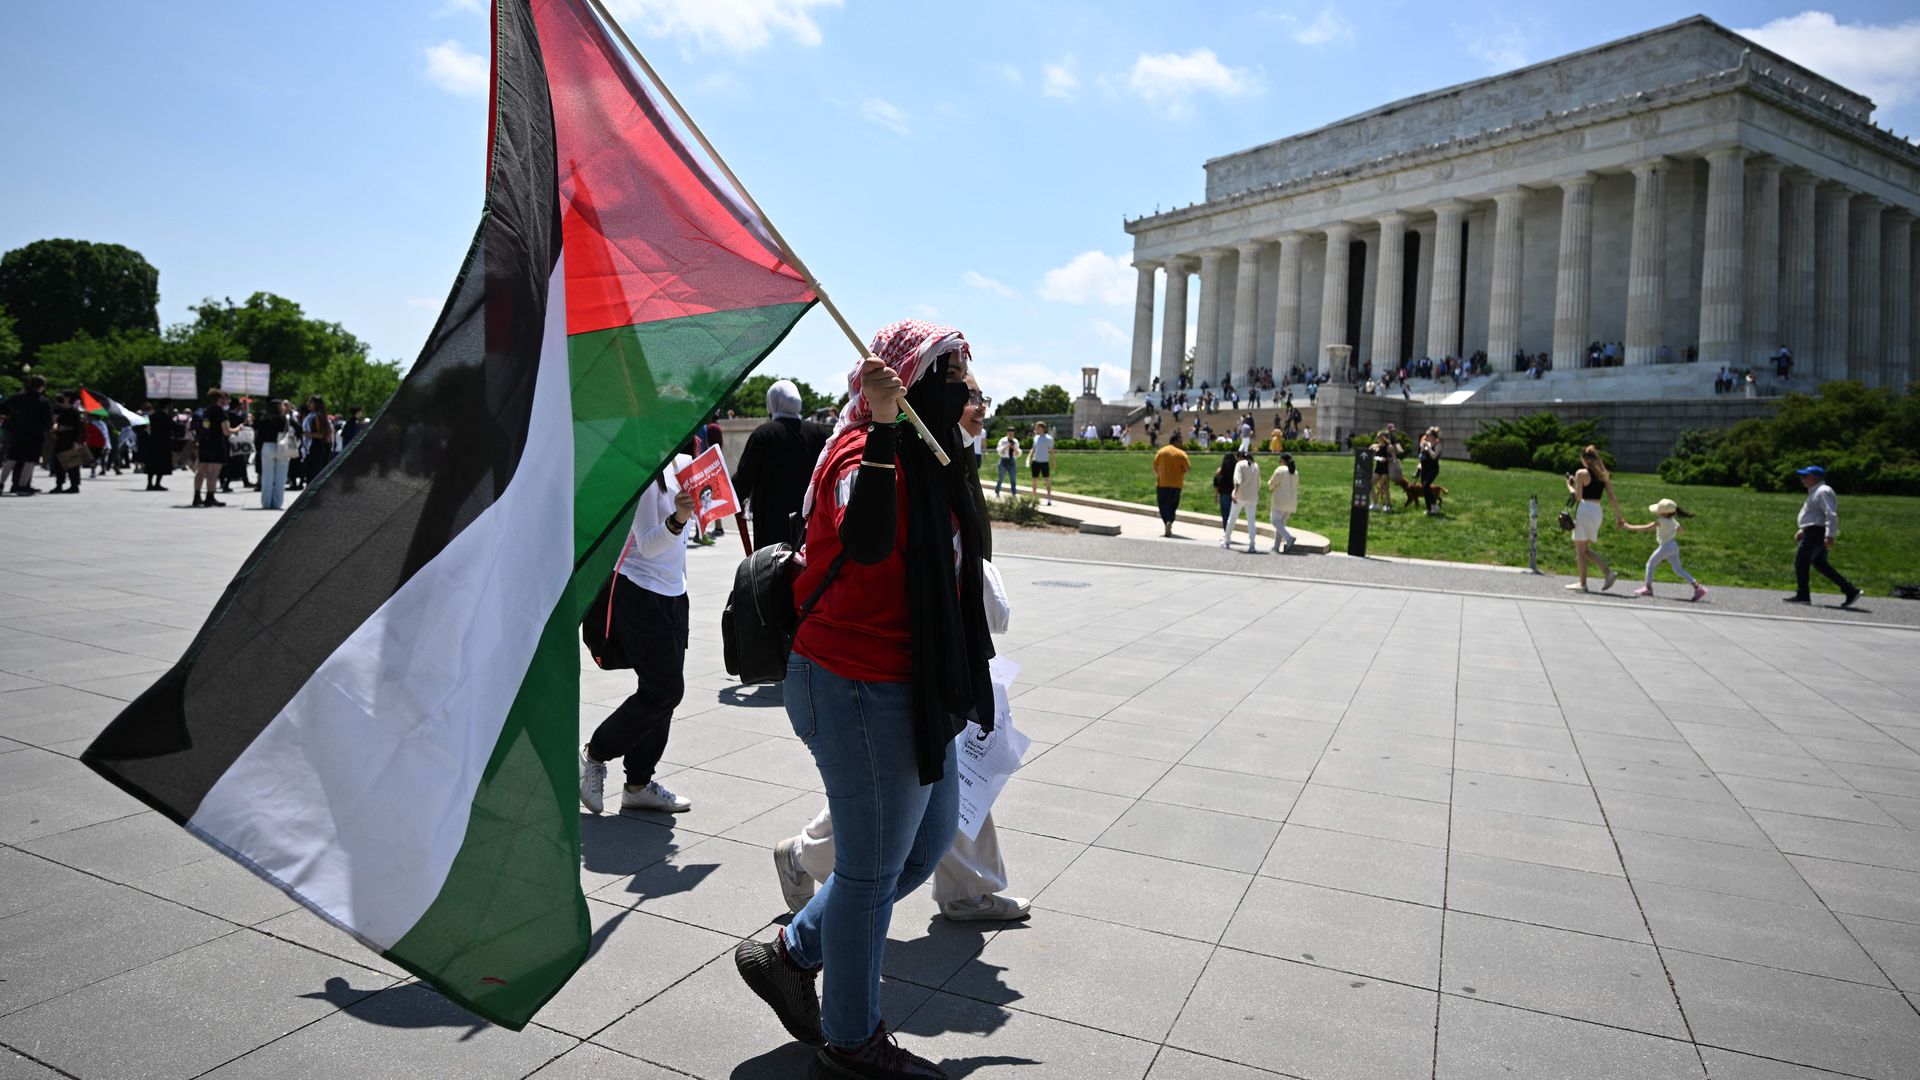 A pro-Palestinian activist is seen carrying a flag near the Lincoln Memorial.